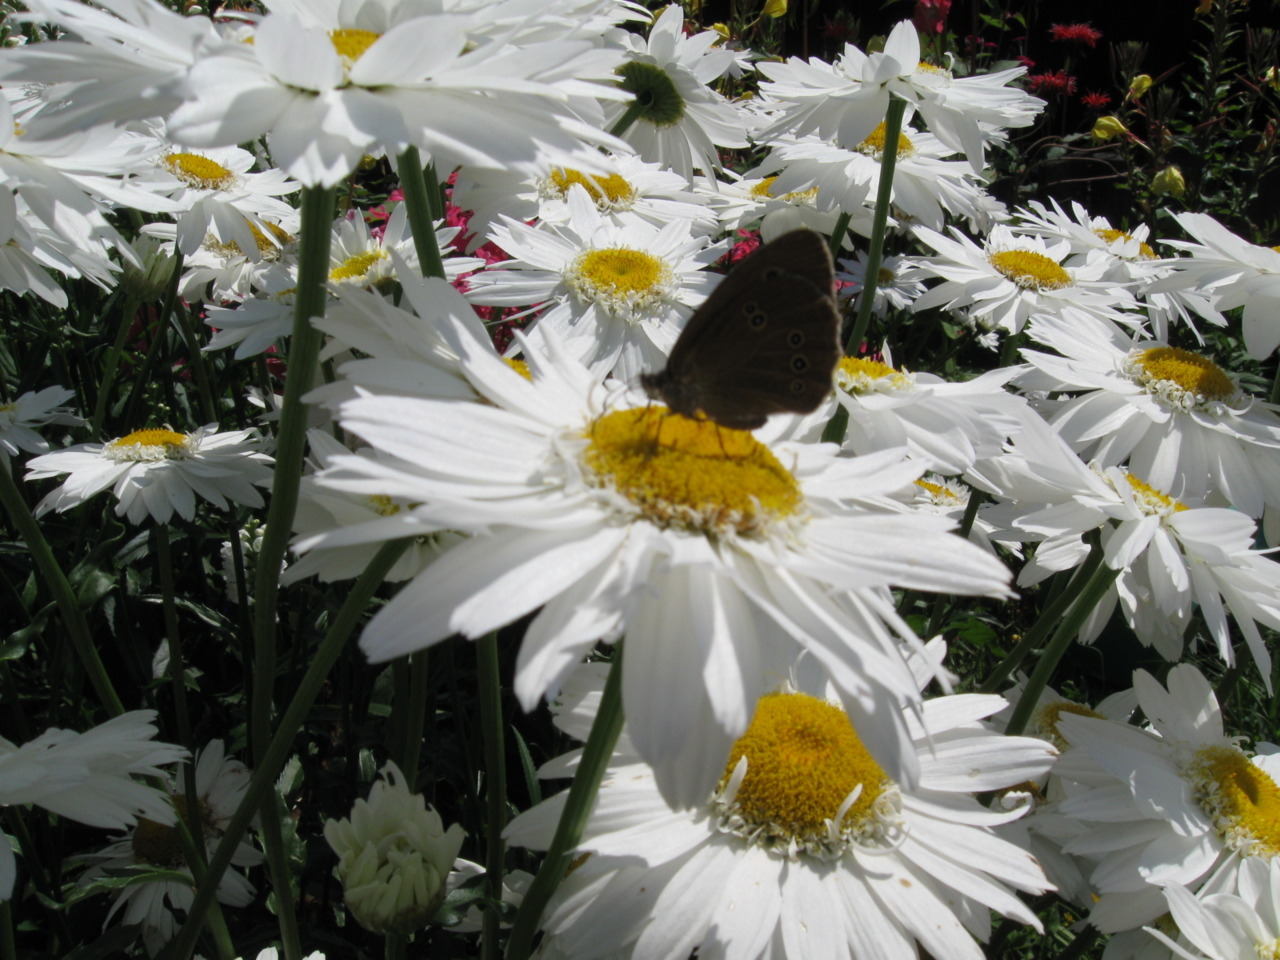 Butterfly on a daisy. Photo done by me, summer of 2010 in my hometown.